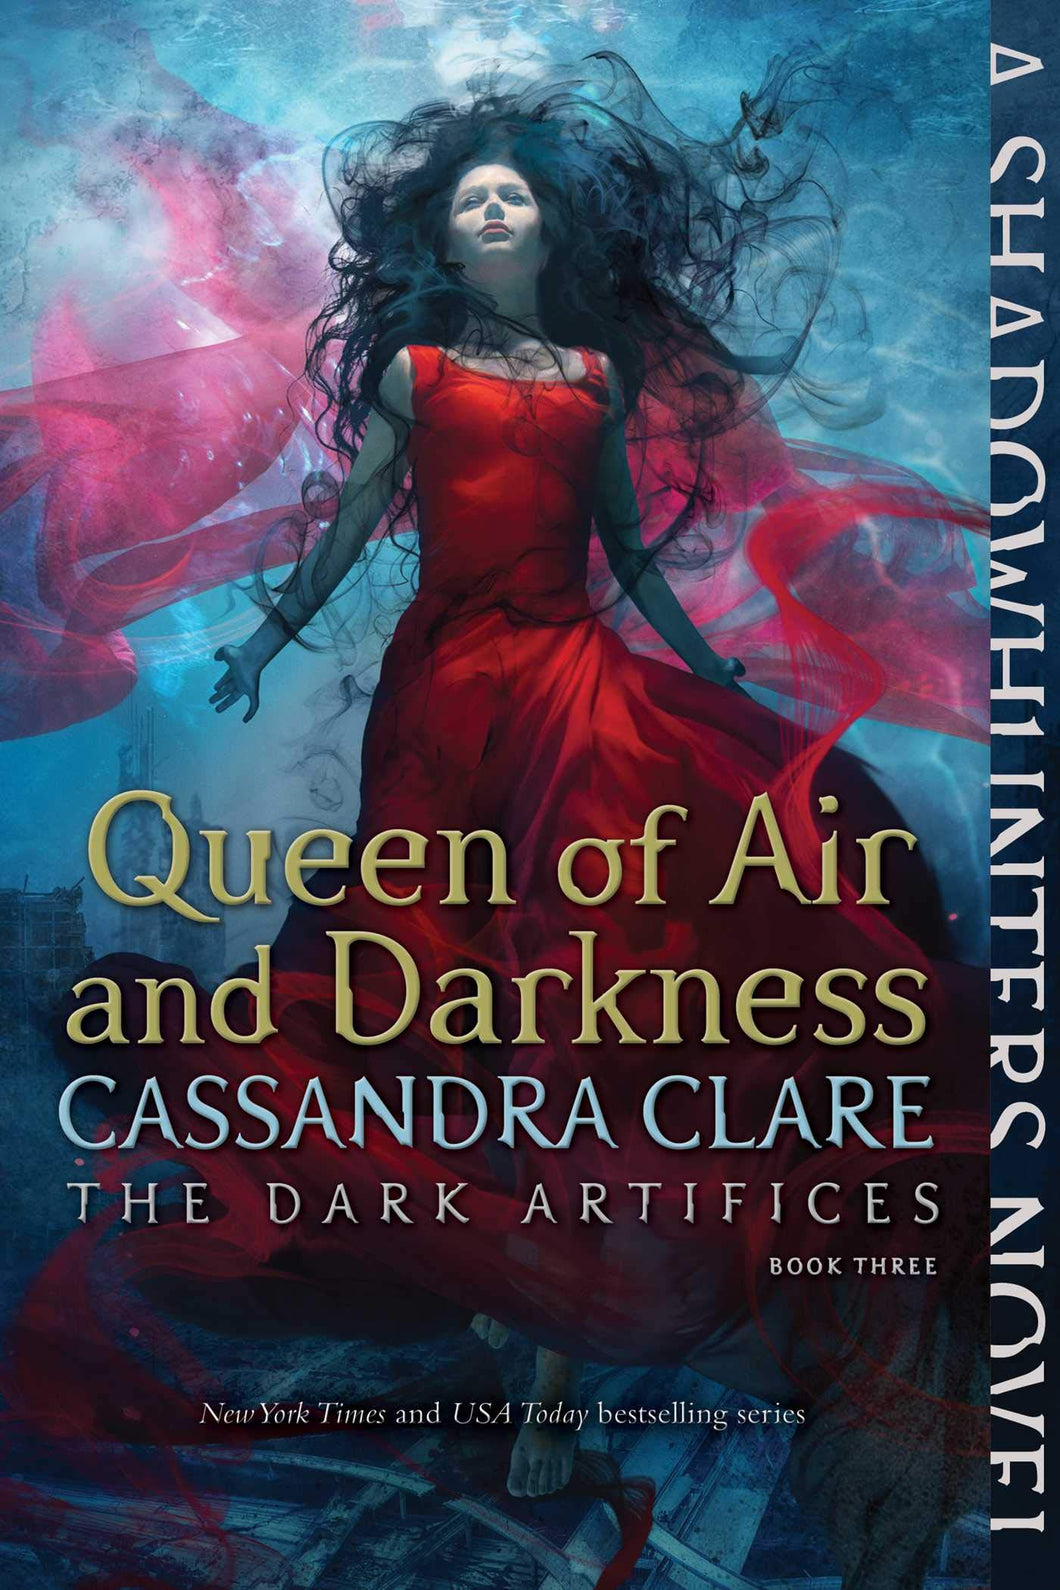 Queen of Air and Darkness (The Dark Artifices Book 3)